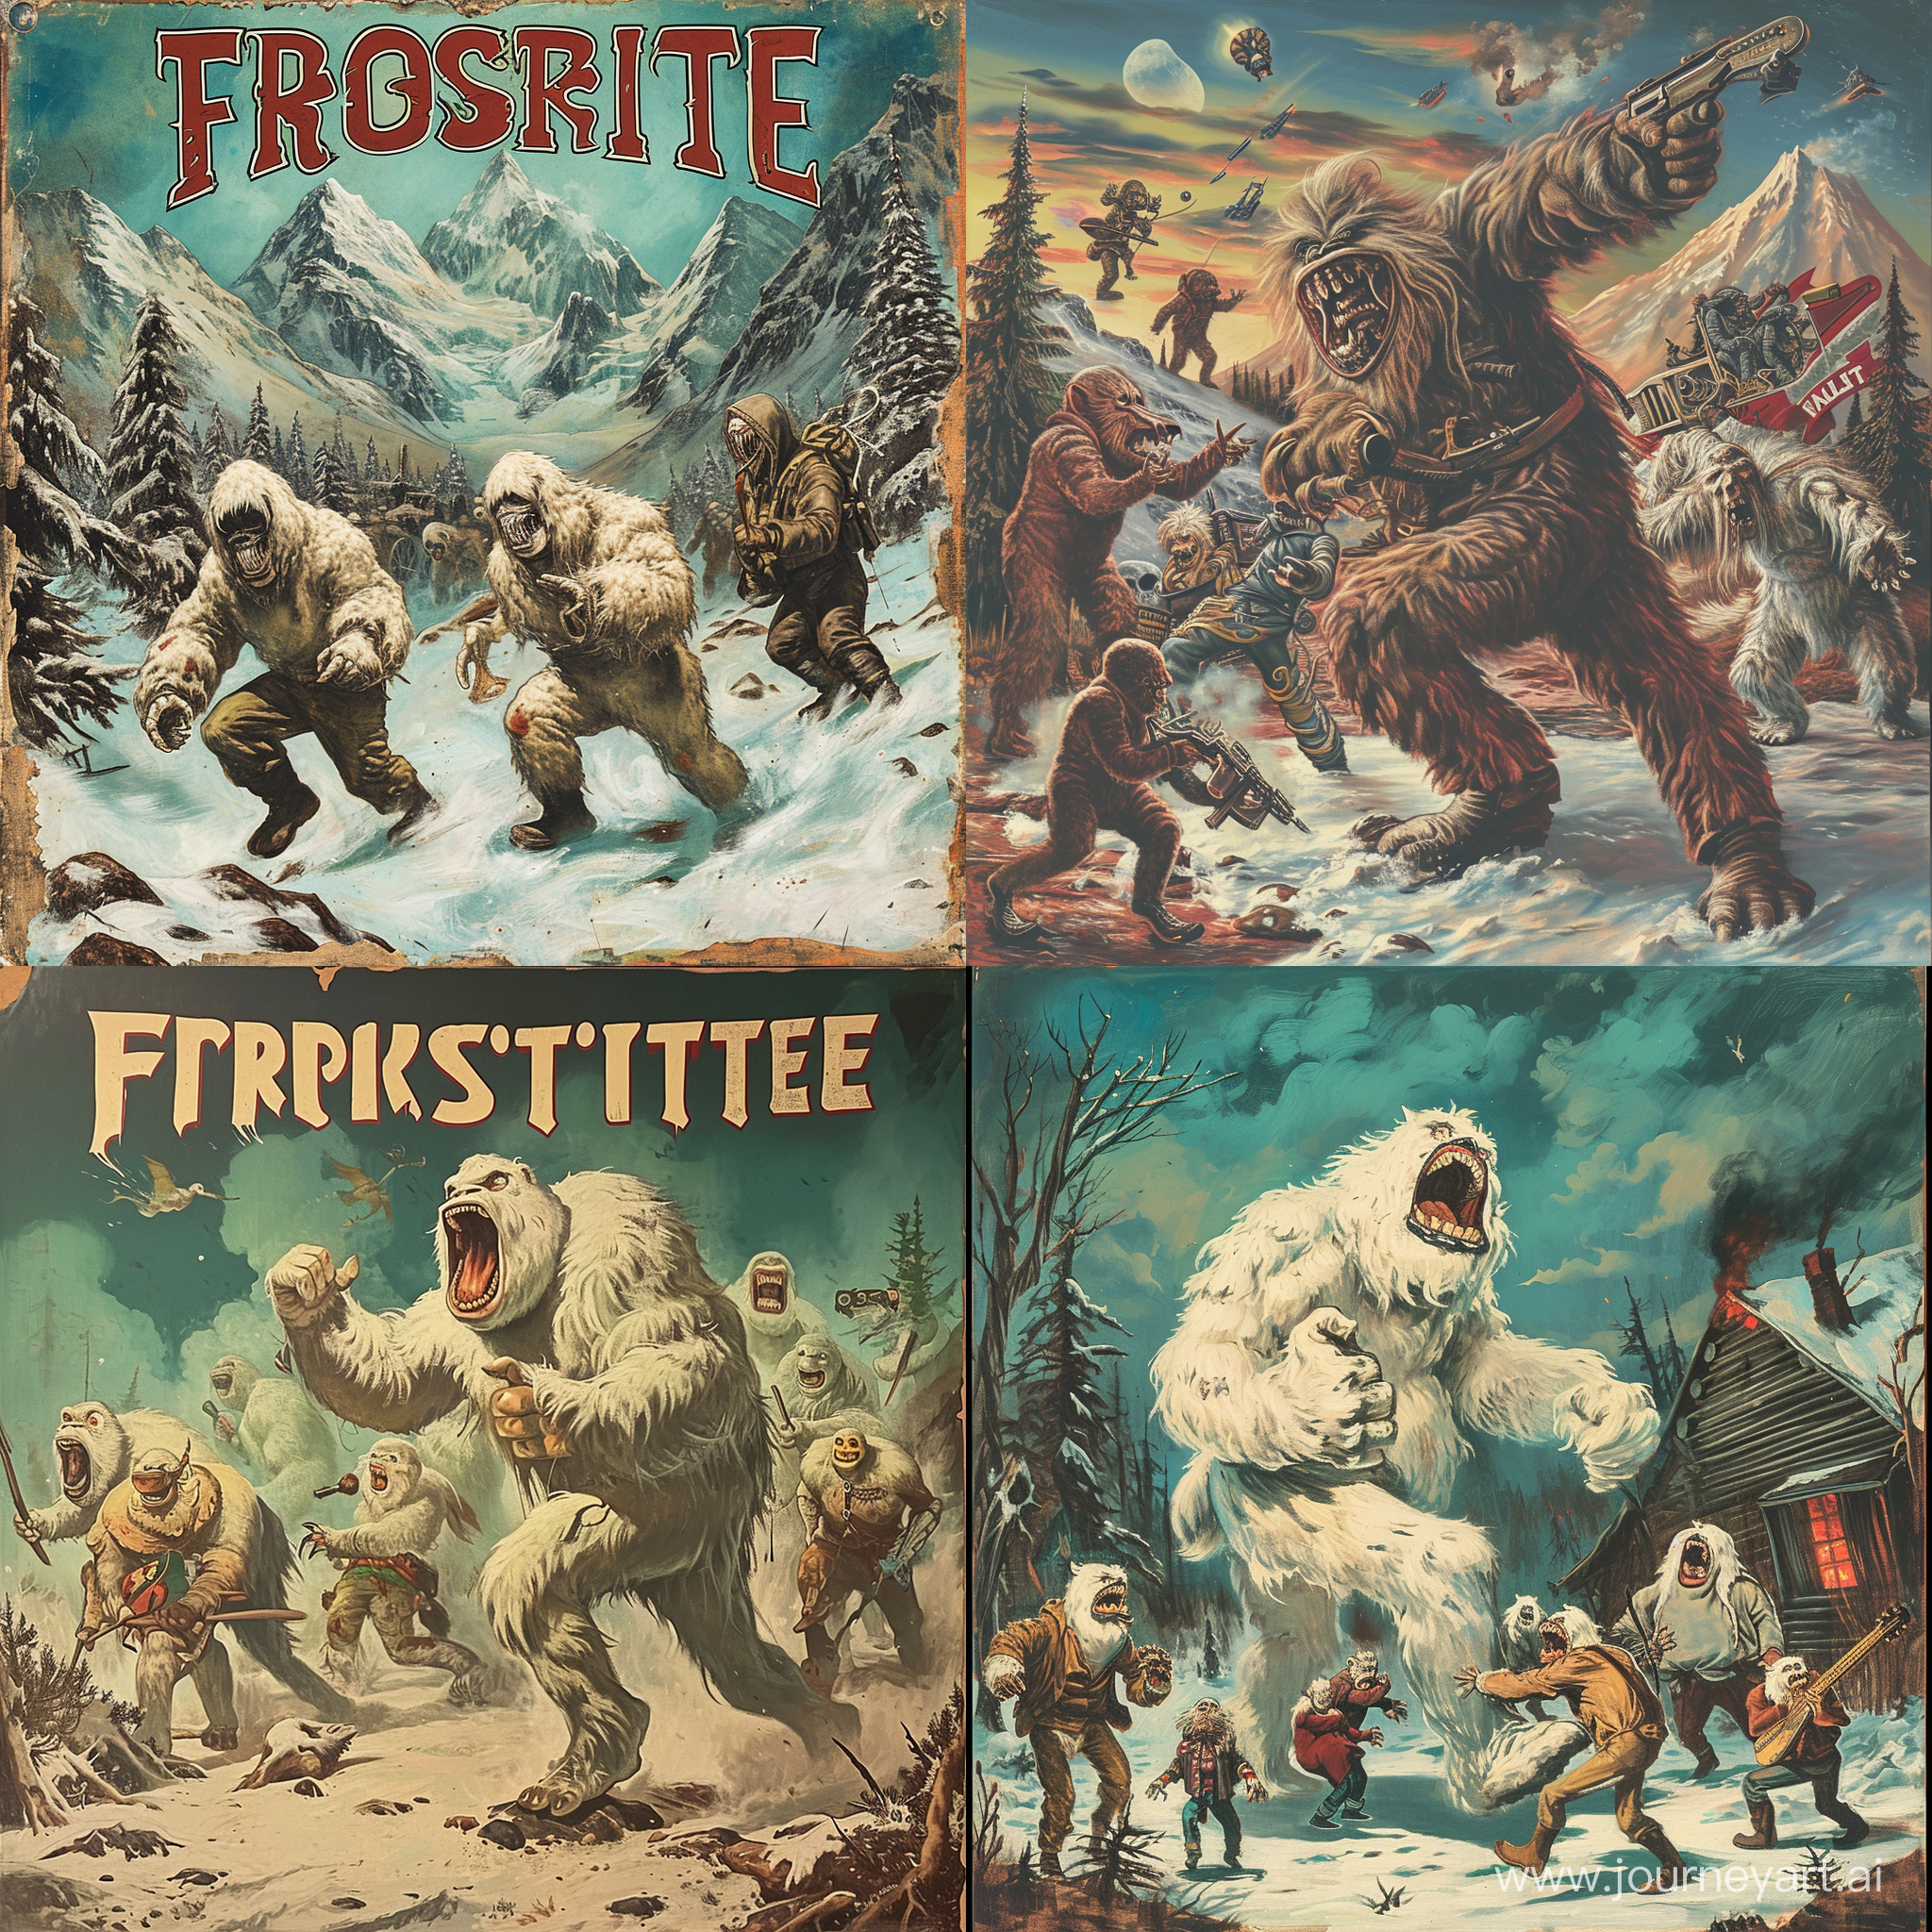 Create the image: An album cover for a stoner doom band, the album is called "Fröstbite", its about a group of yeti invading north america, in the style of a 30s comic, painted